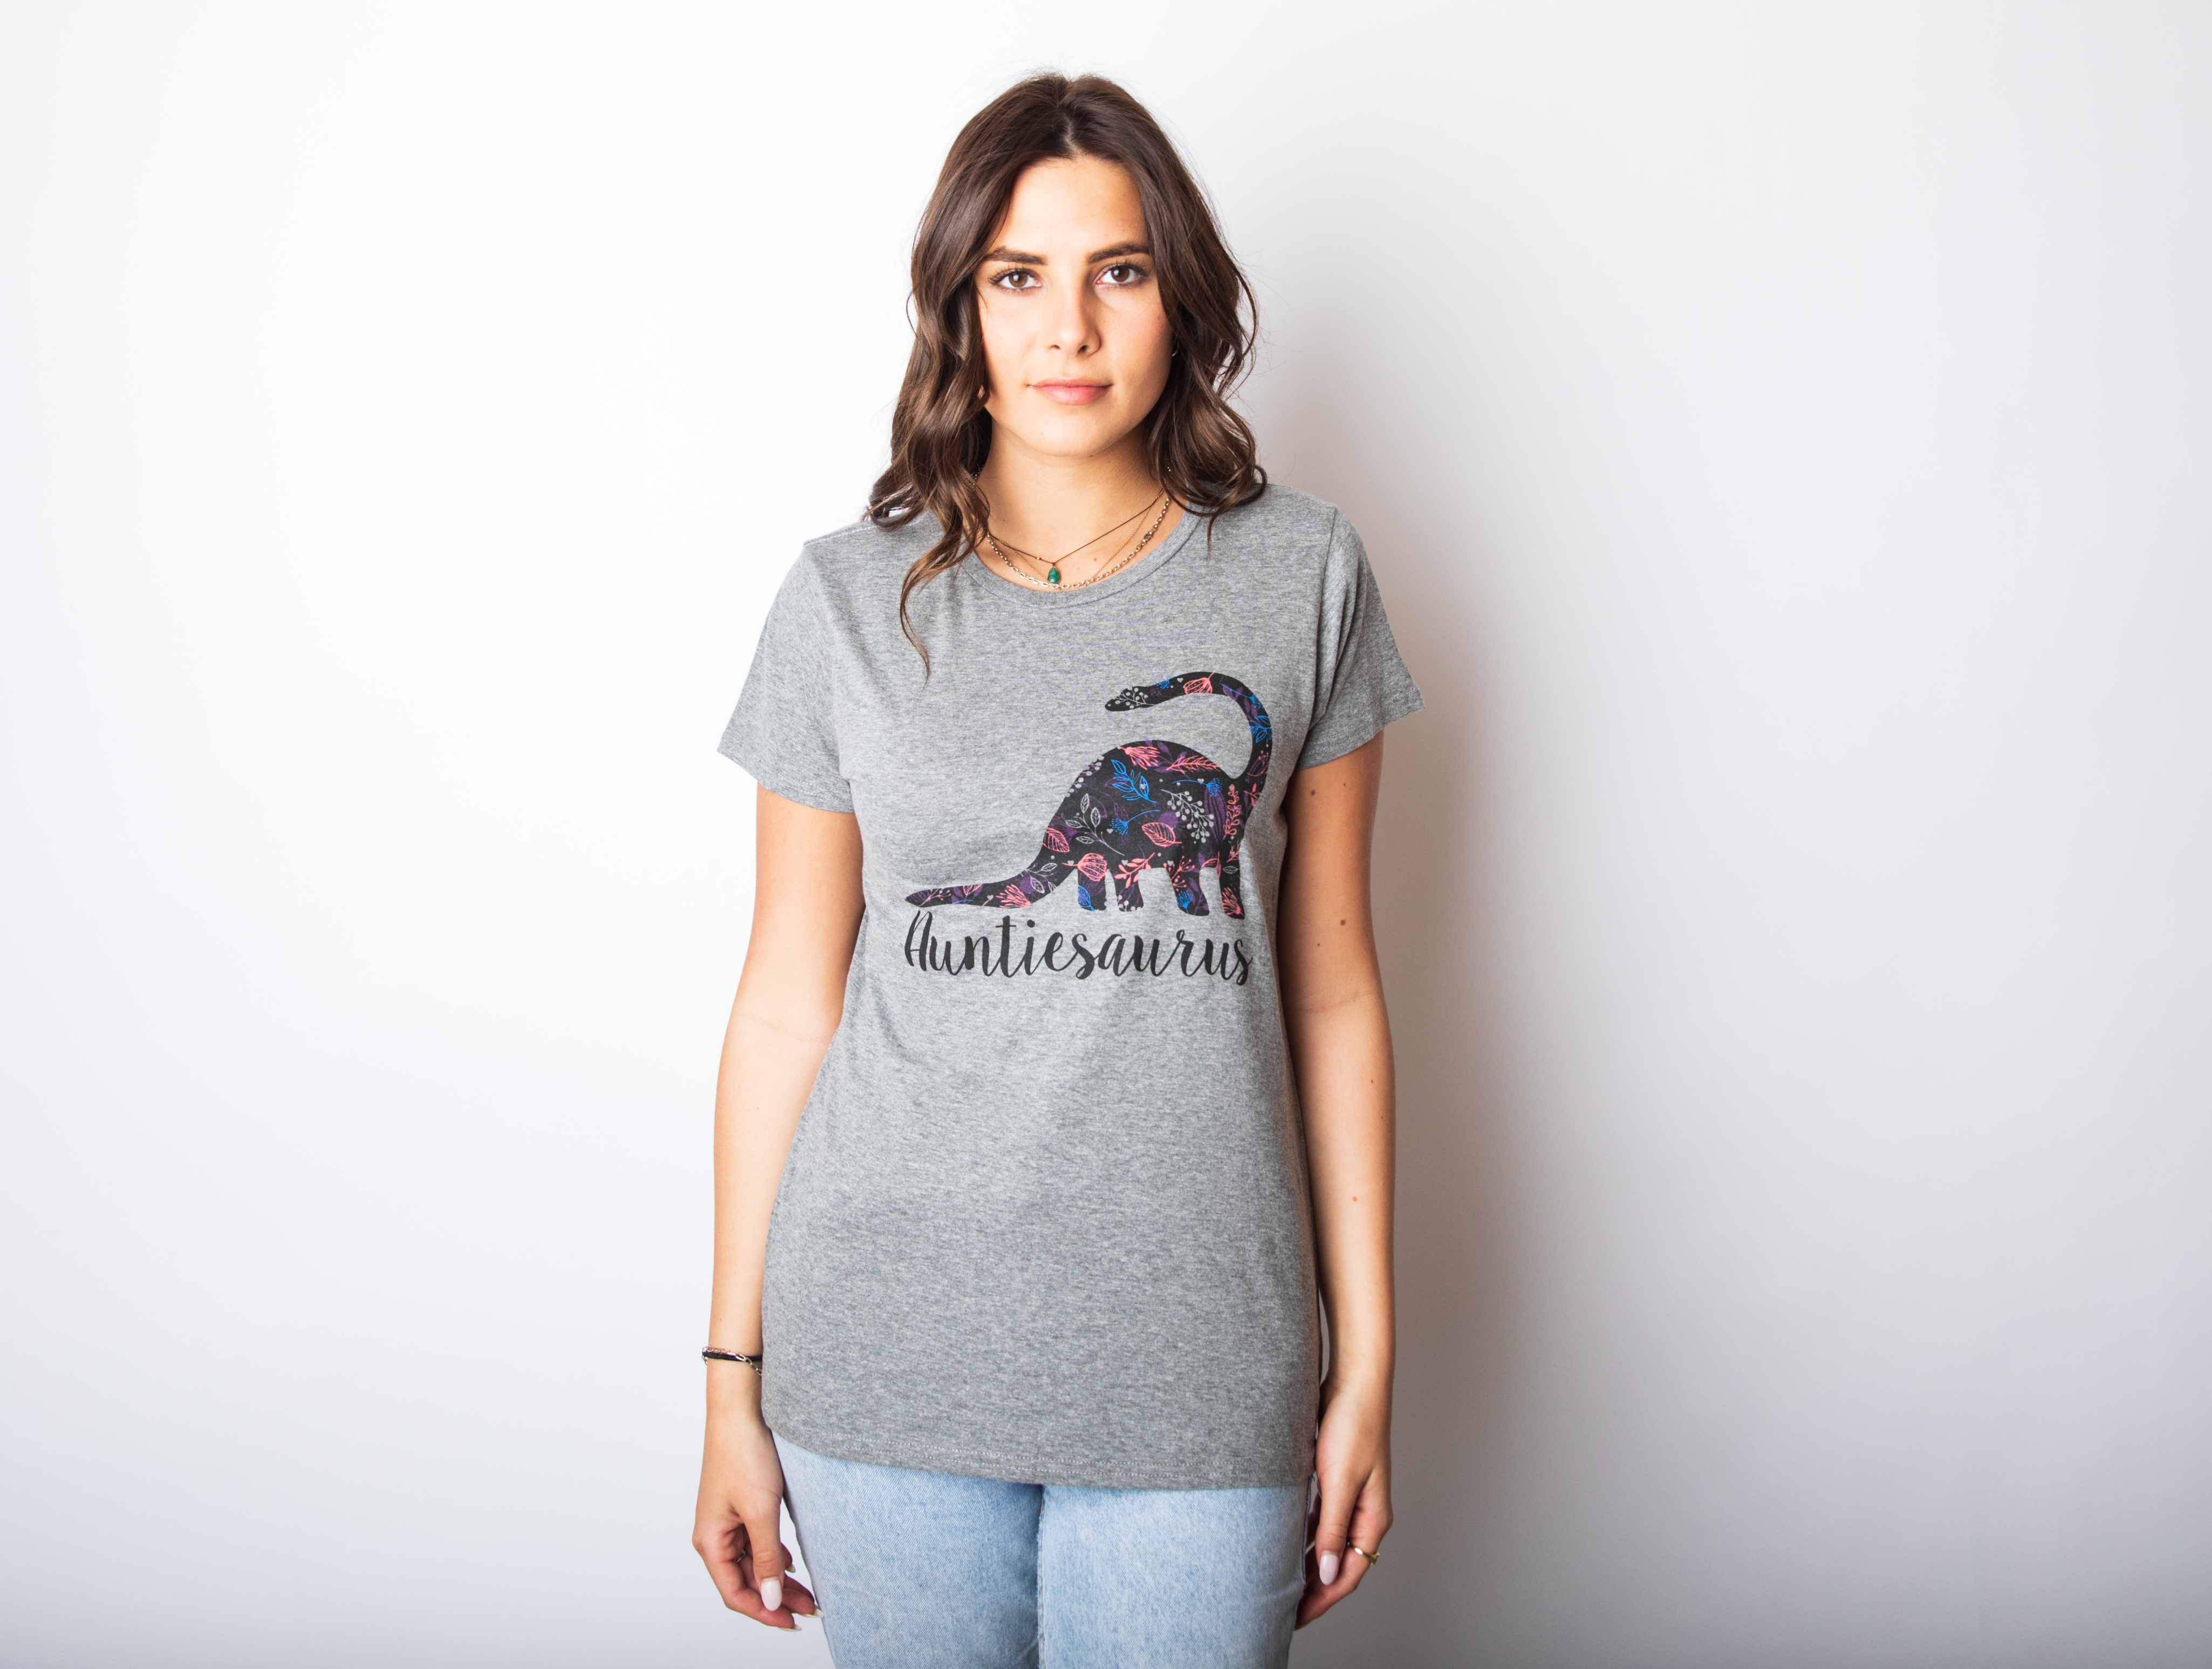 Womens Auntiesaurus T Shirt Funny Kids Gift for Aunt Cute Graphic Dinosaur Top Womens Graphic Tees - image 3 of 10